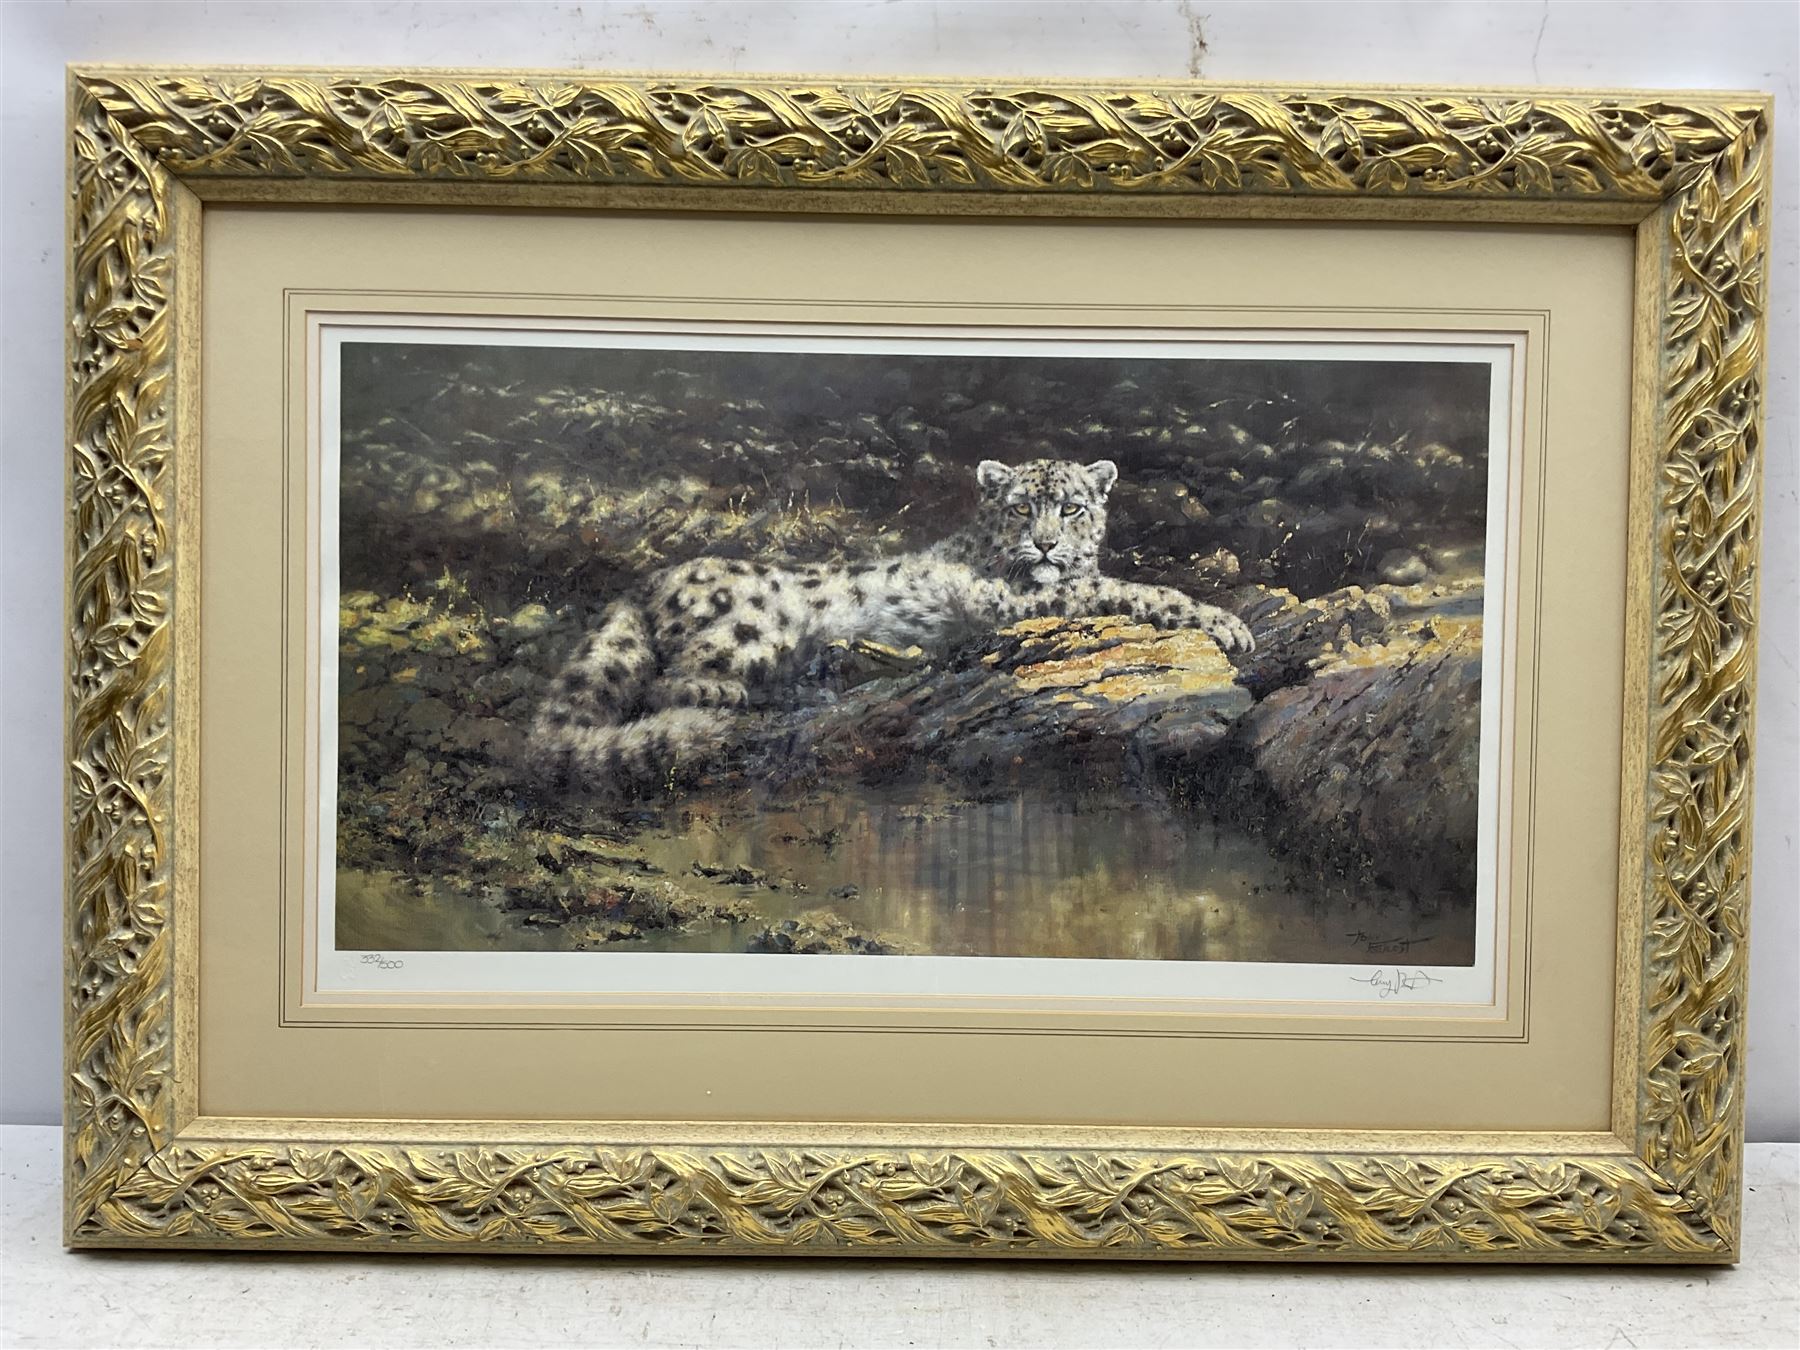 Tony Forrest (British 1961-): 'Watchful Eye' - Snow Leopard - Image 2 of 2